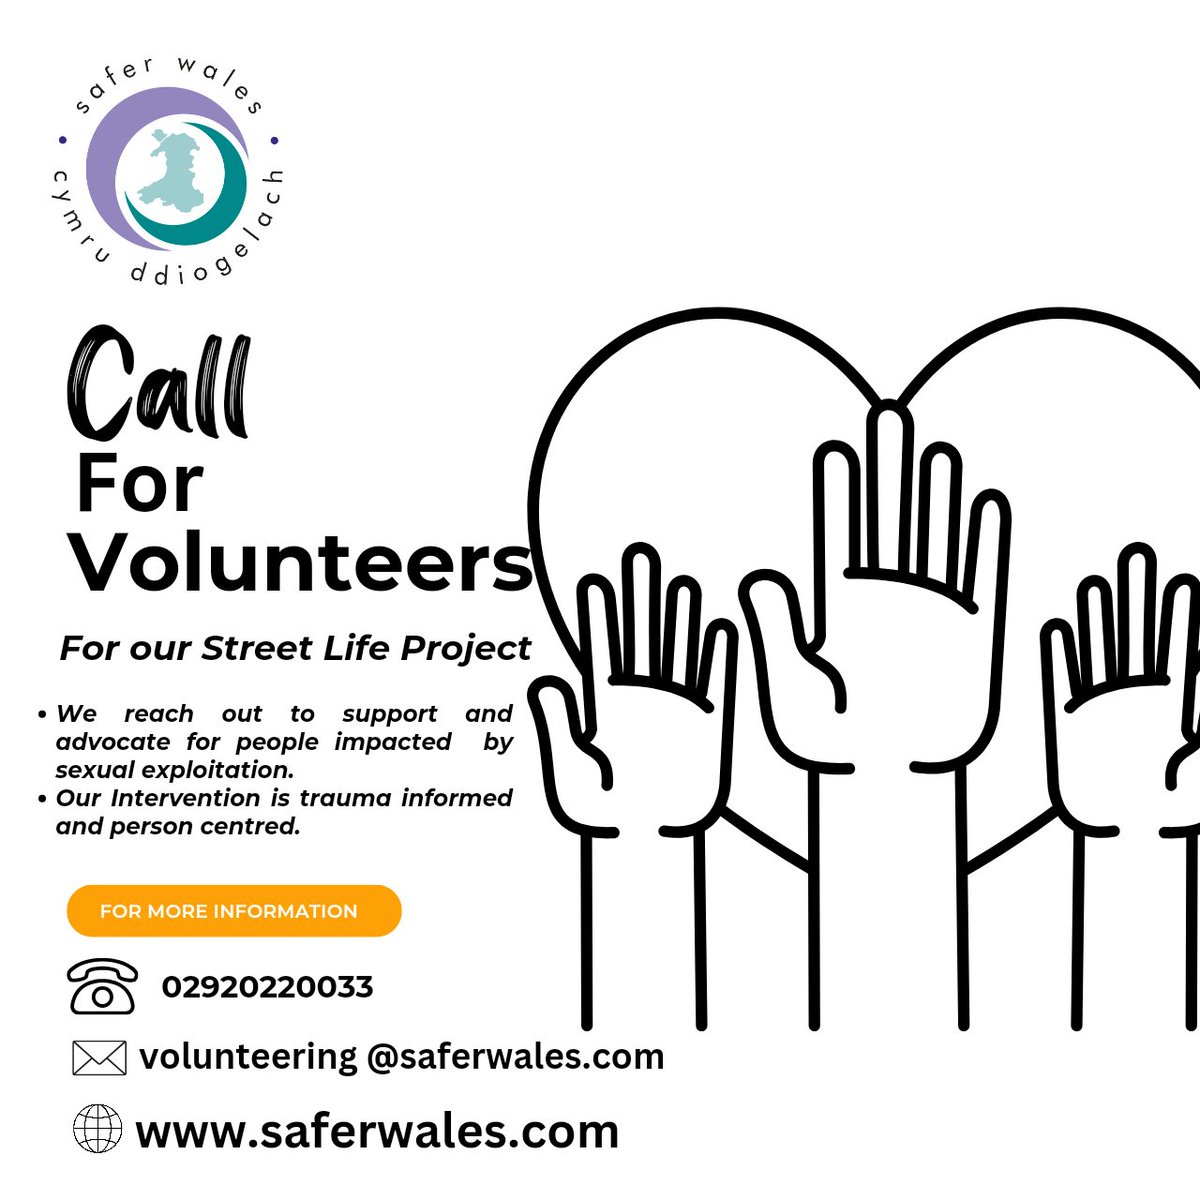 Street Life is looking for volunteers!!! Have you been looking for an opportunity to impact your society? Go through this opportunity on the @volwales website. Contact us for more information. @cdfvolcentre @GVolServices @RCLocalNews